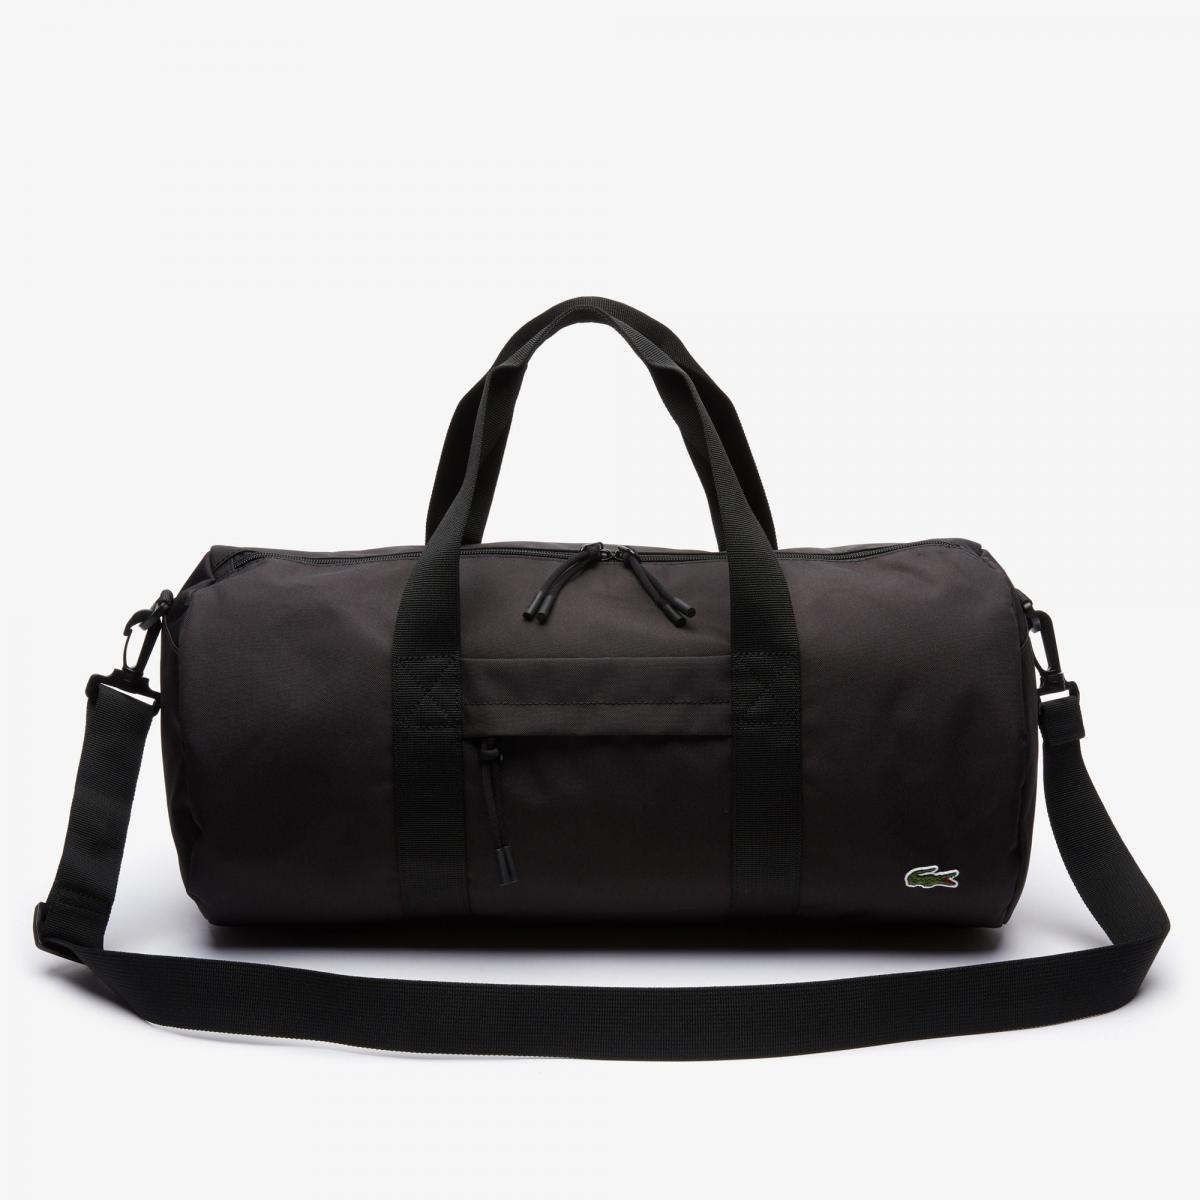 lacoste roll bag